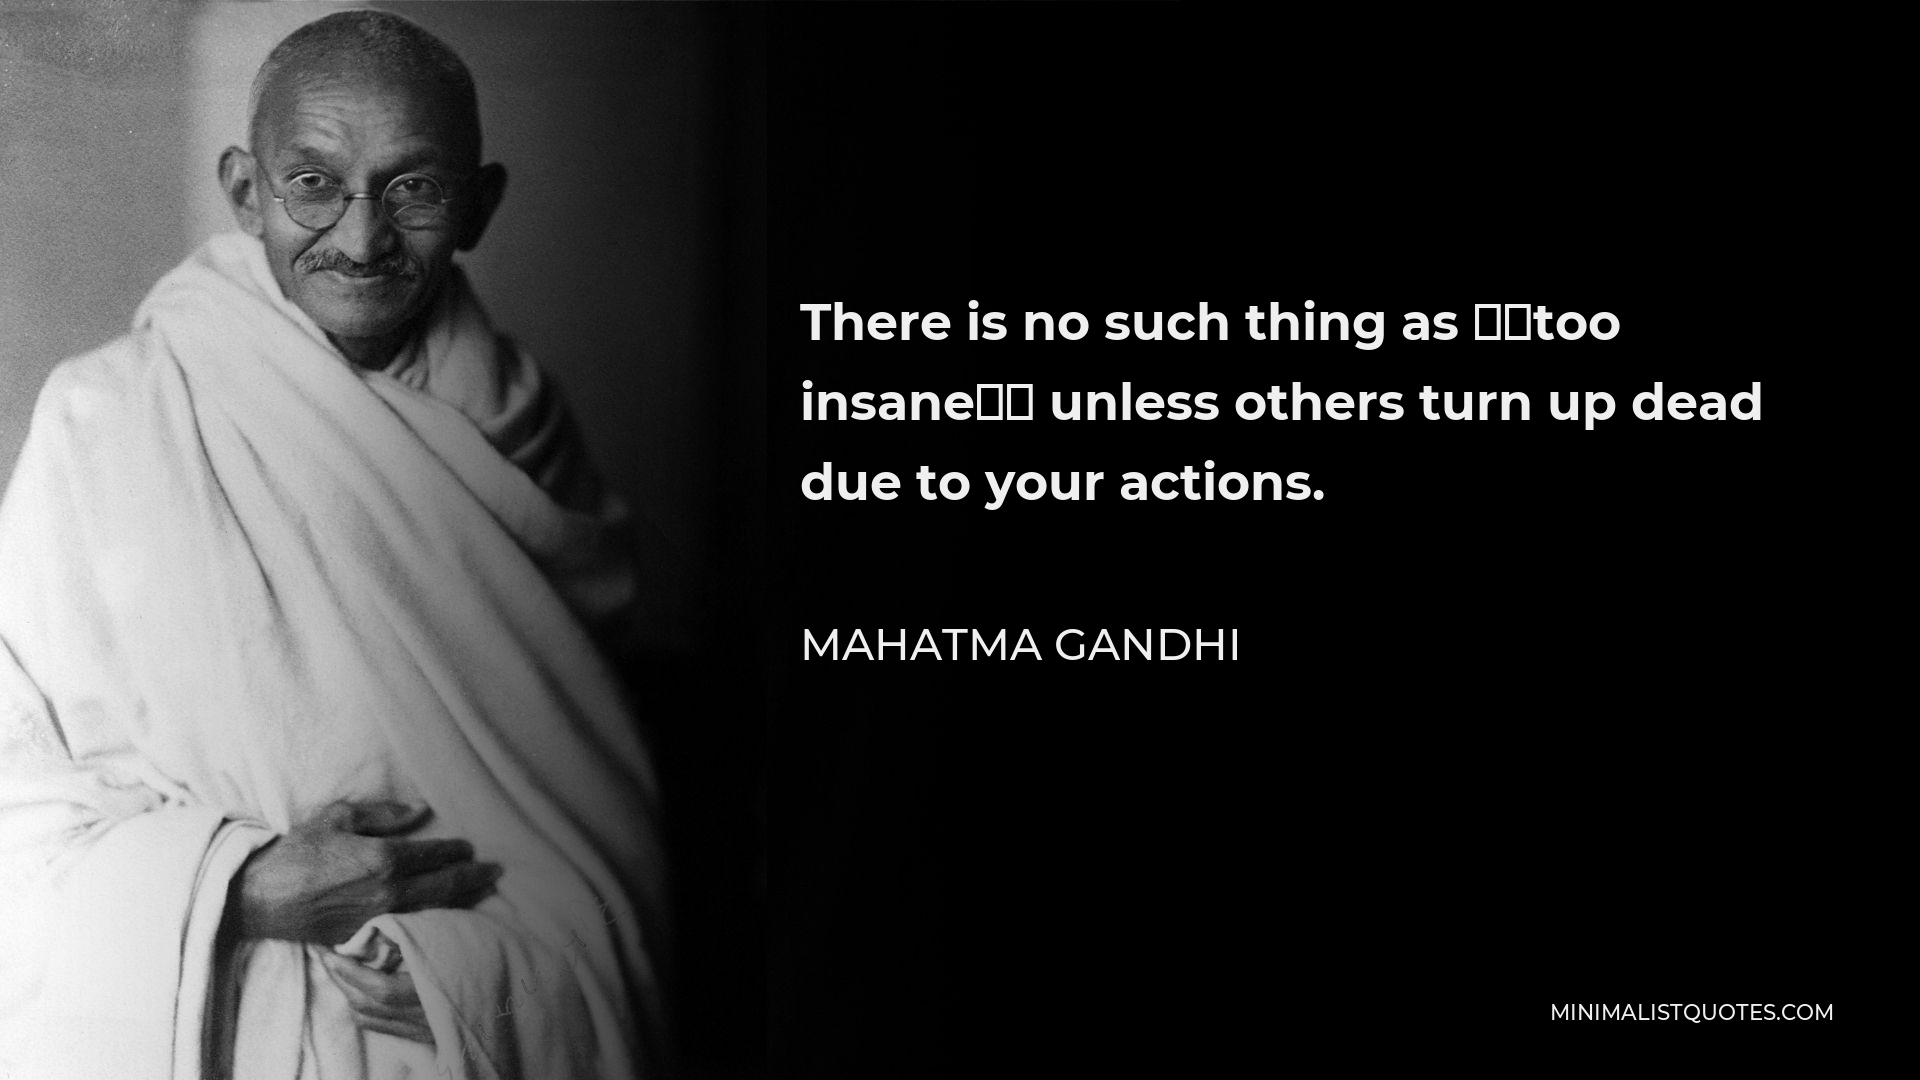 Mahatma Gandhi Quote - There is no such thing as ‘too insane’ unless others turn up dead due to your actions.